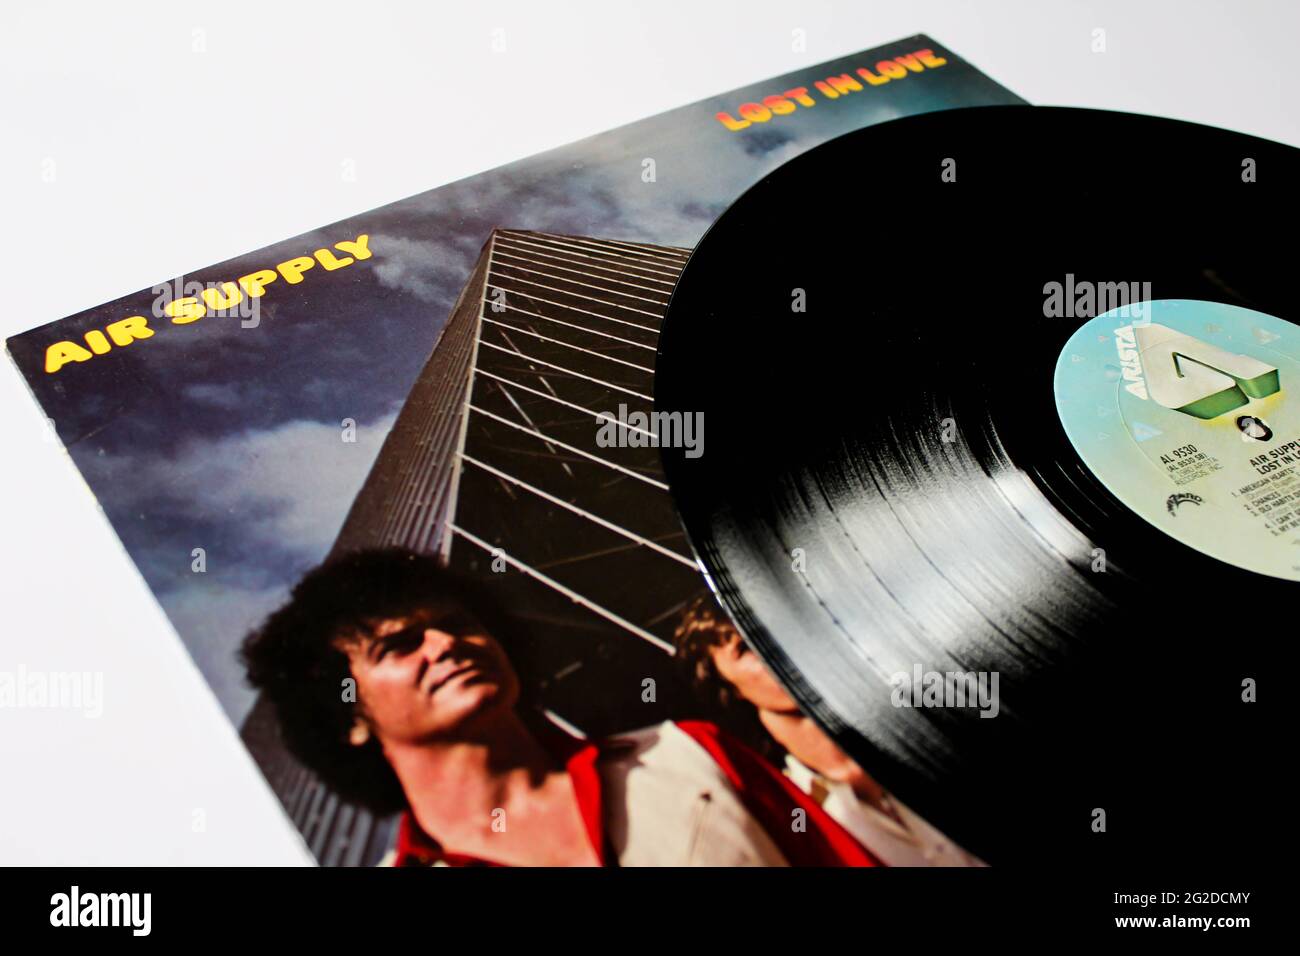 Australian Pop band, Air Supply music album on vinyl record LP disc. Titled: Lost in love album cover Stock Photo